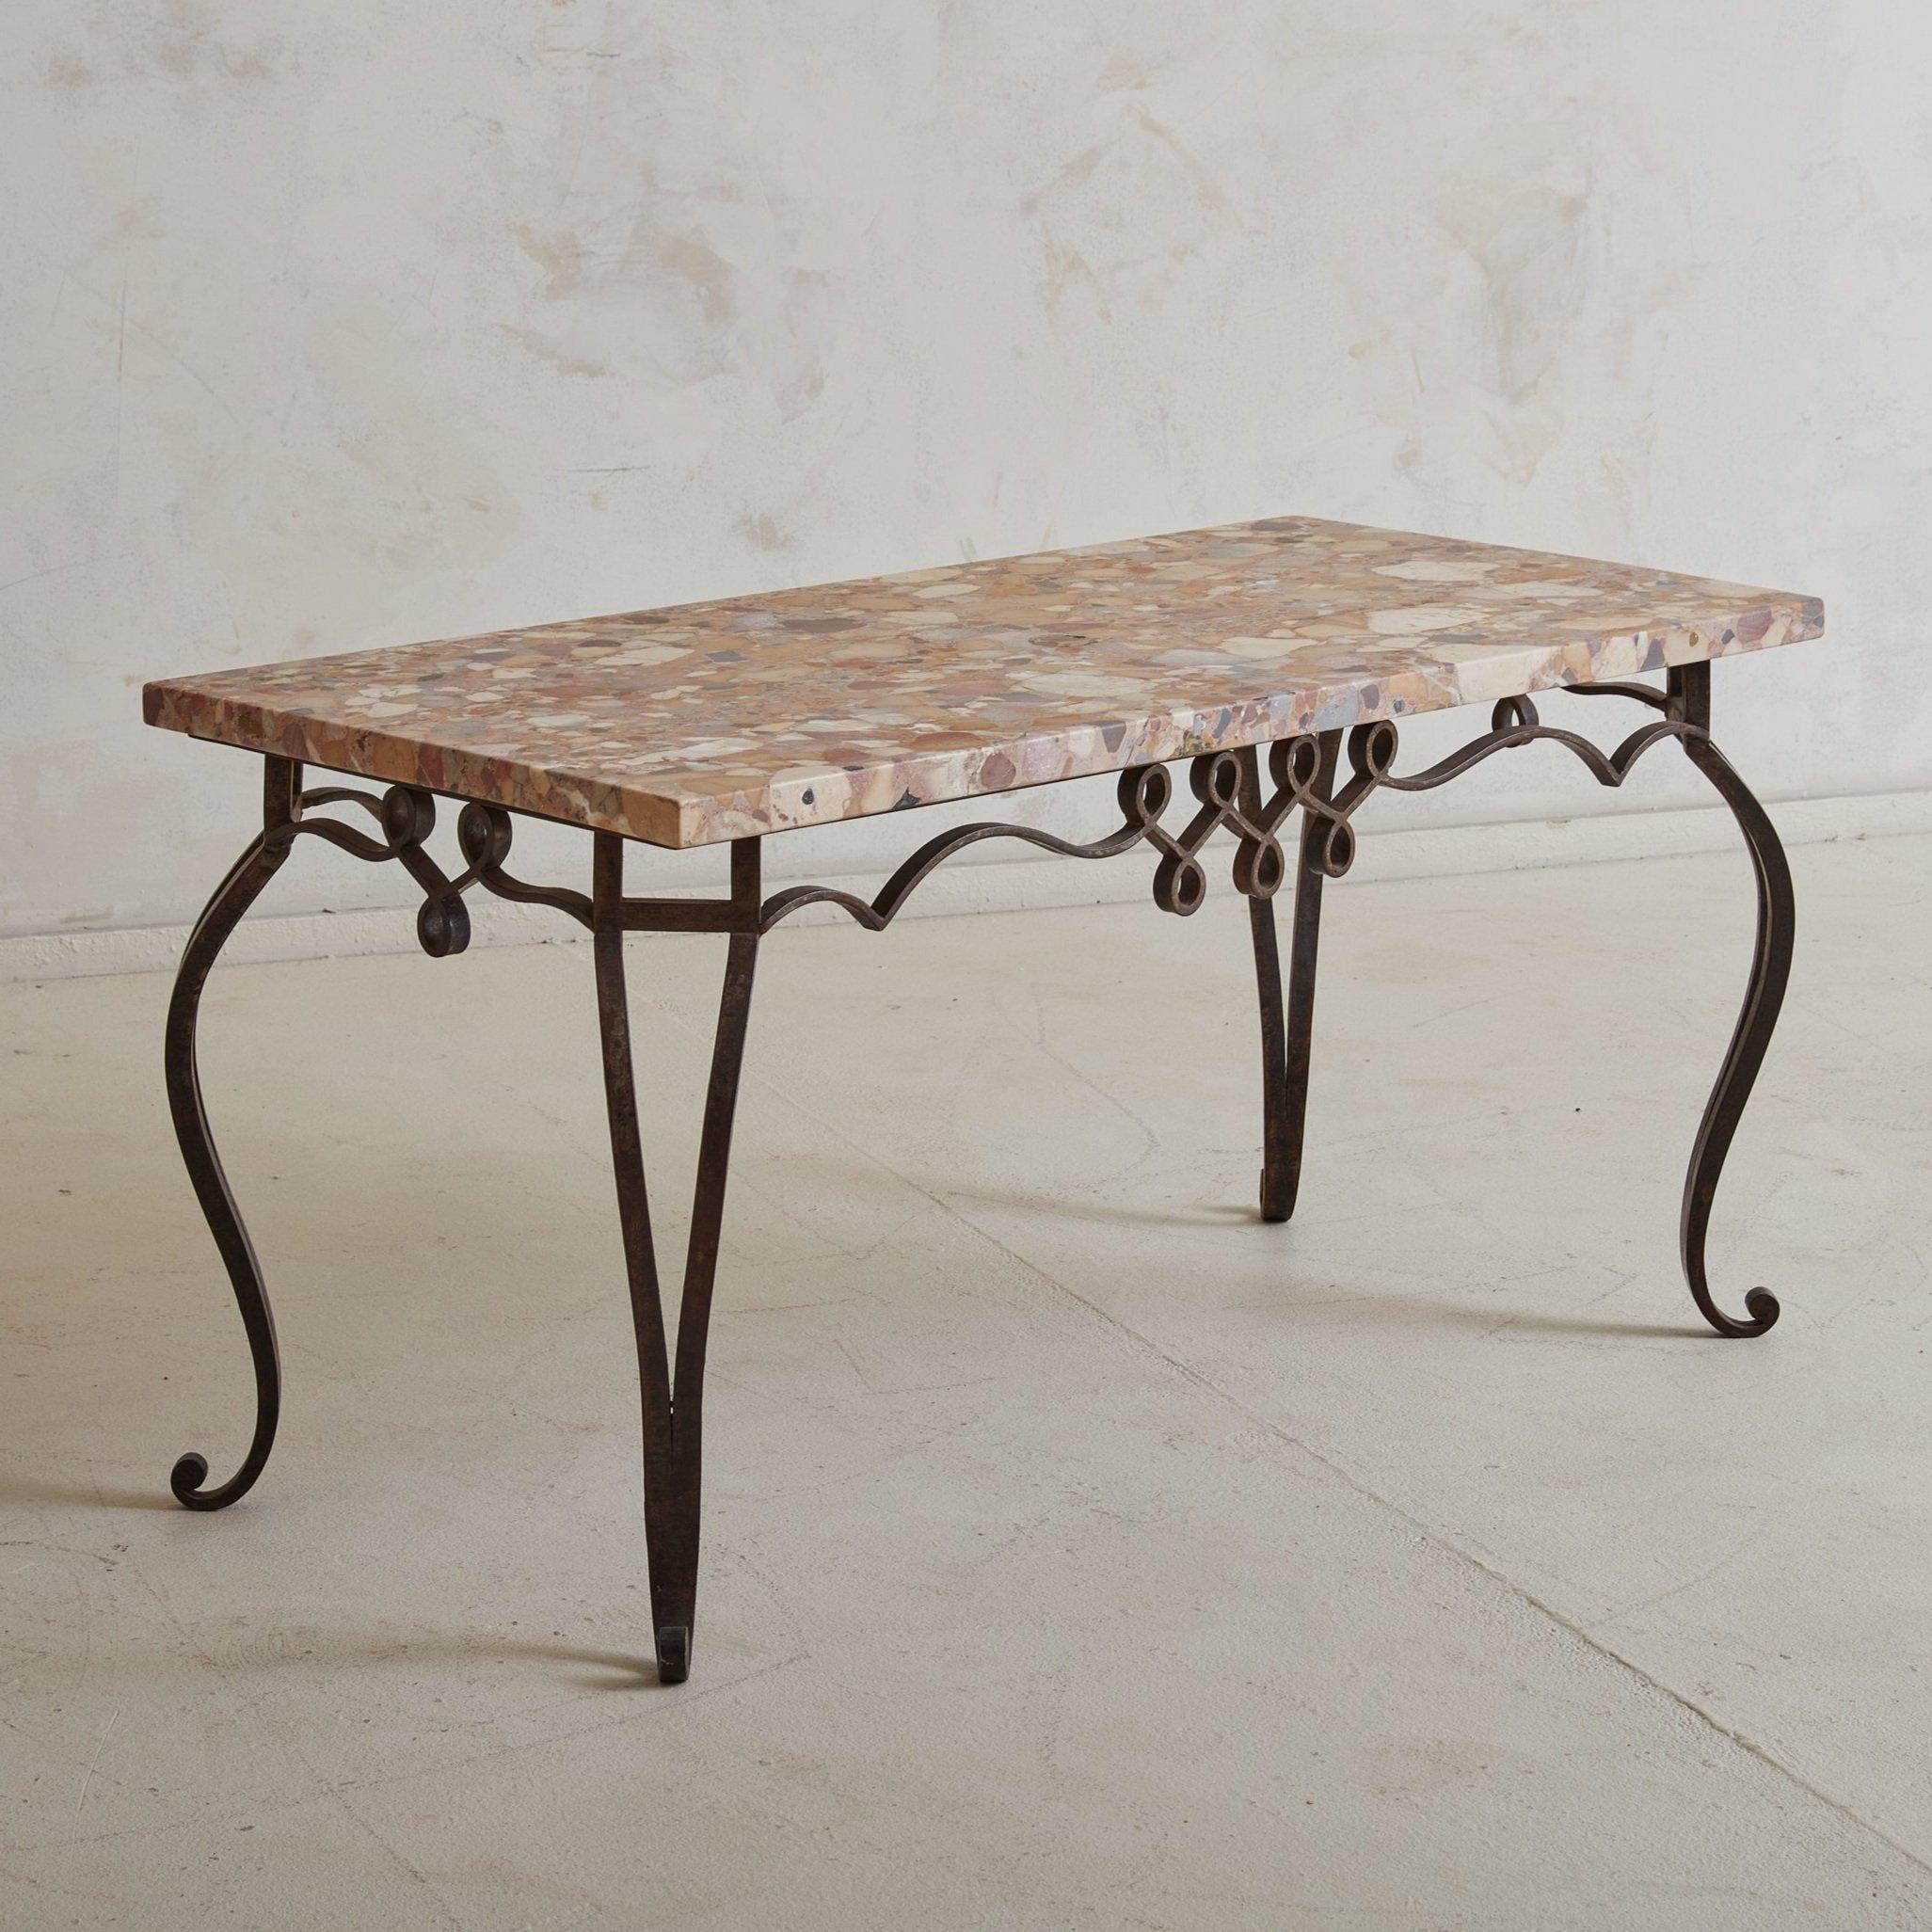 A gorgeous honed pink marble and hand forged iron base coffee table sourced in Italy. Varying hues of orange, lavender, and red can be seen throughout the intricately veined marble top. The ornate iron frame features four curved legs, swirl feet,